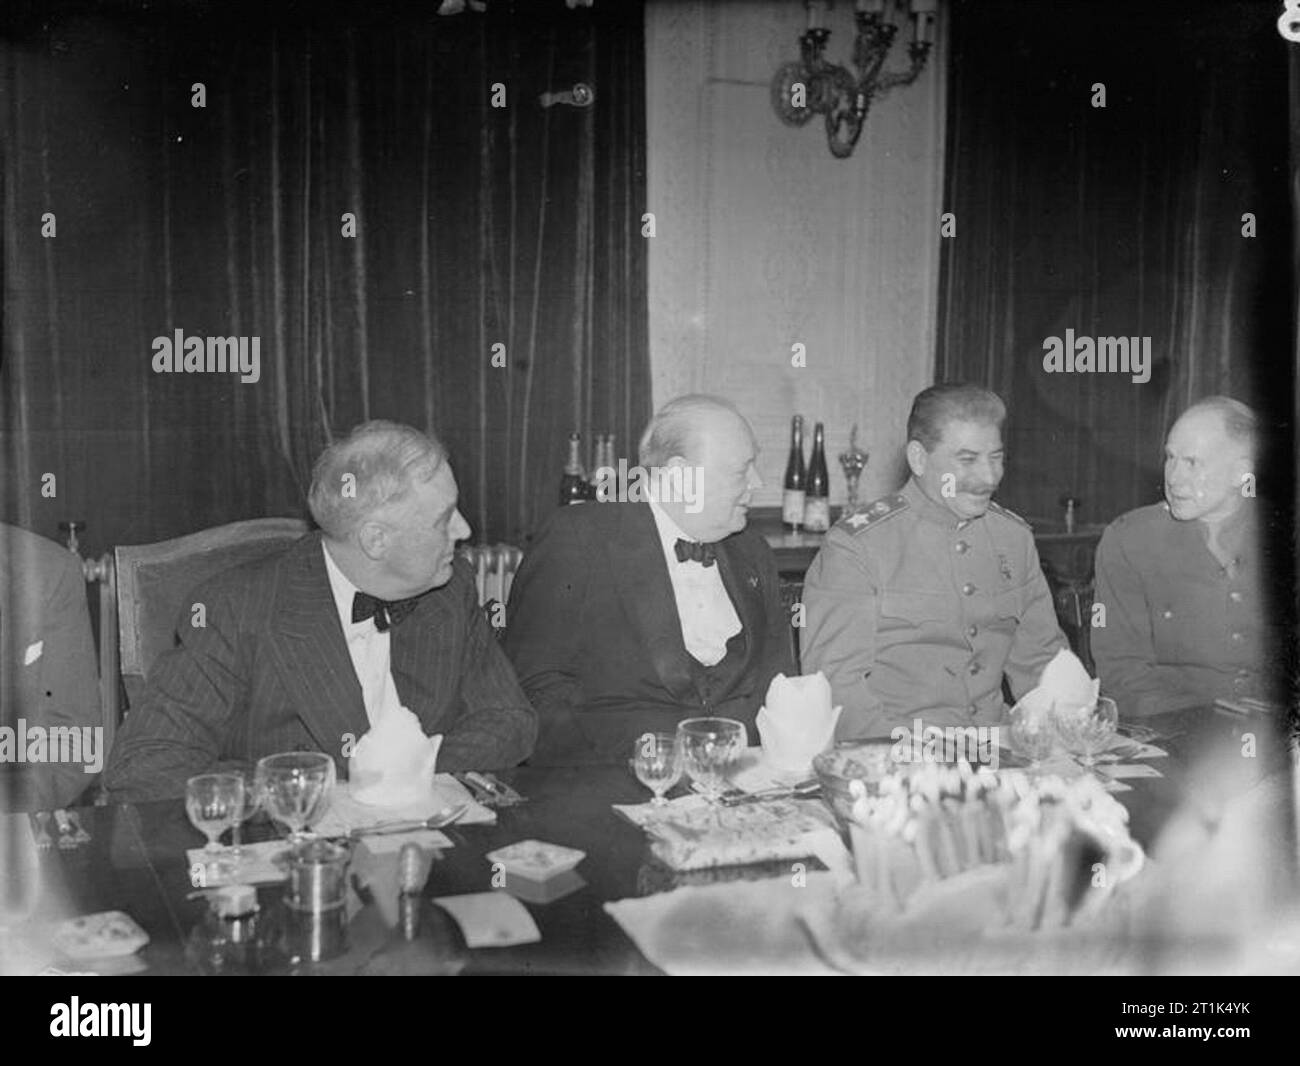 Winston Churchill during the Second World War in Iran The 'Big Three', Franklin D Roosevelt, Winston Churchill and Joseph Stalin, sit together at a dinner party held in the Victorian Drawing Room of the British Legation, Tehran, in Iran, to mark Winston Churchill's 69th birthday on 30th November 1943. Stock Photo